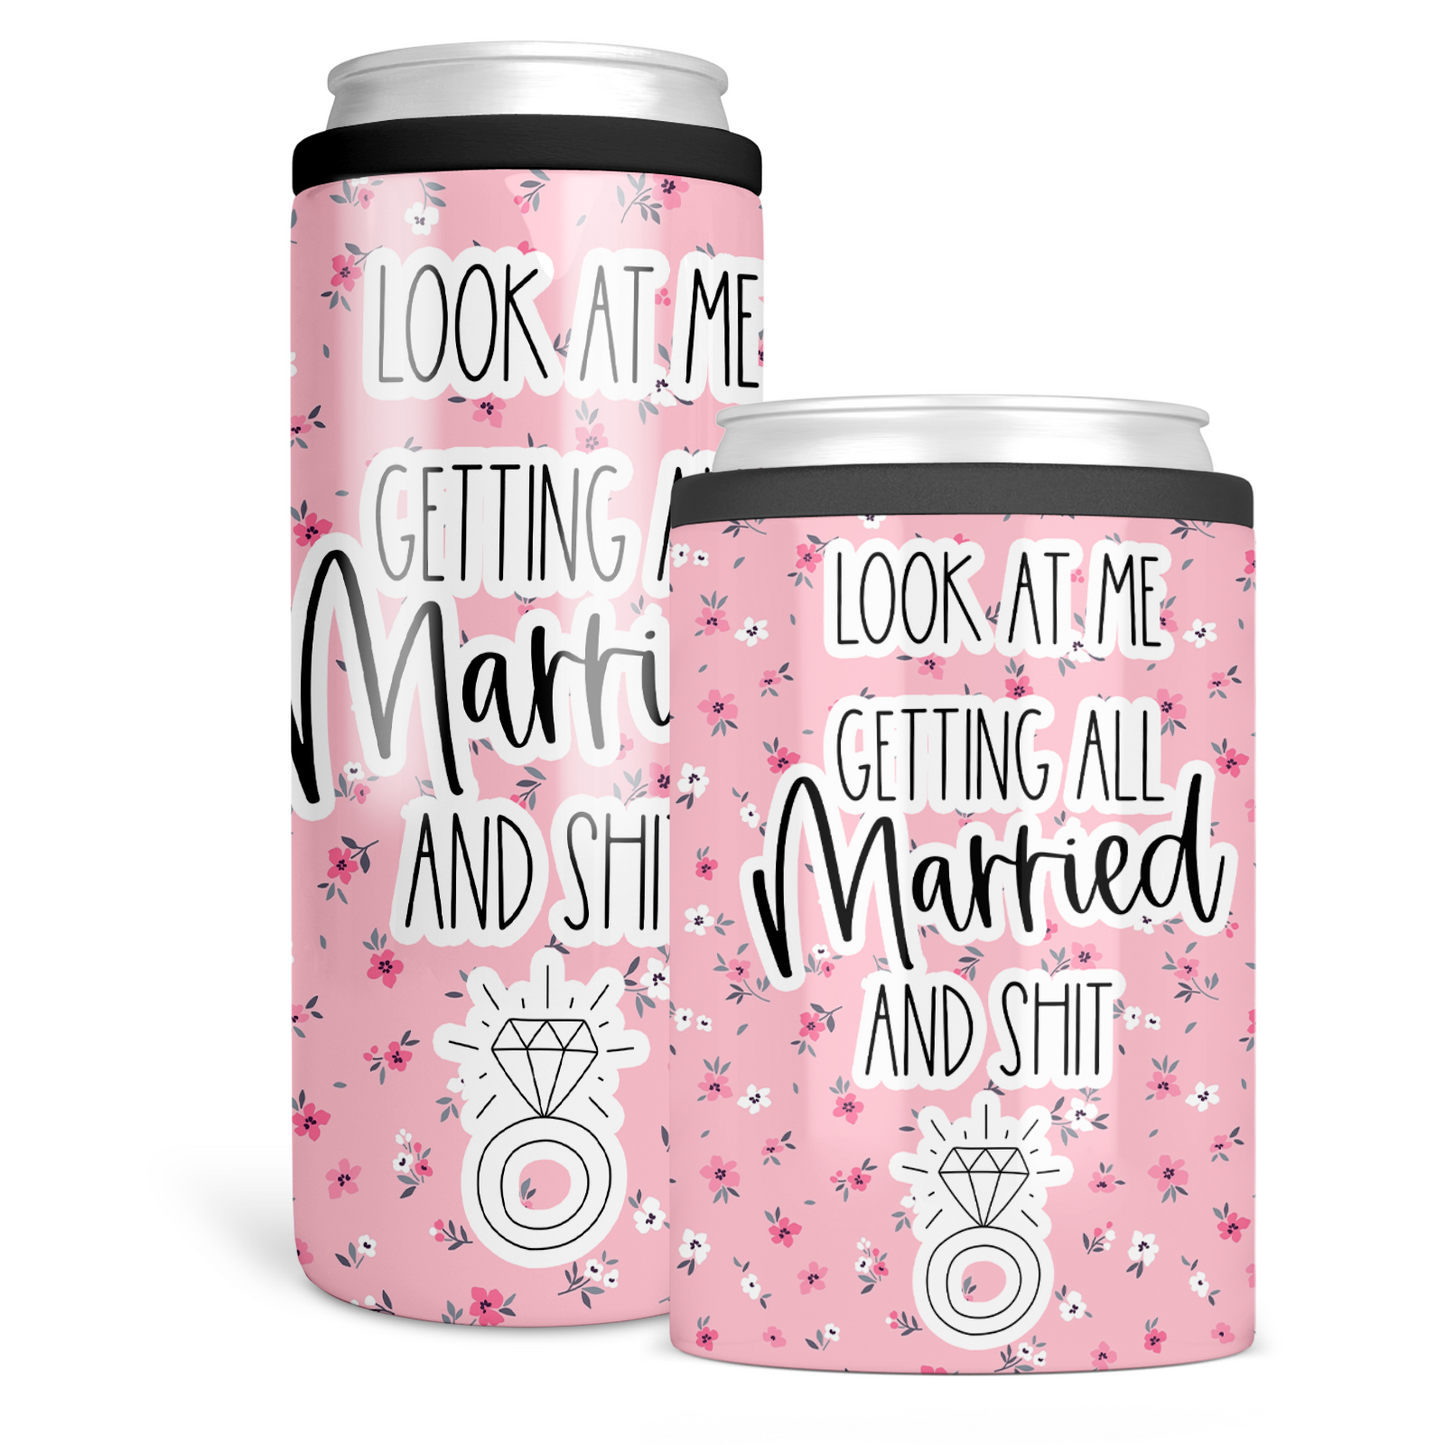 Look At Me Getting All Married and Shit  Can Cooler